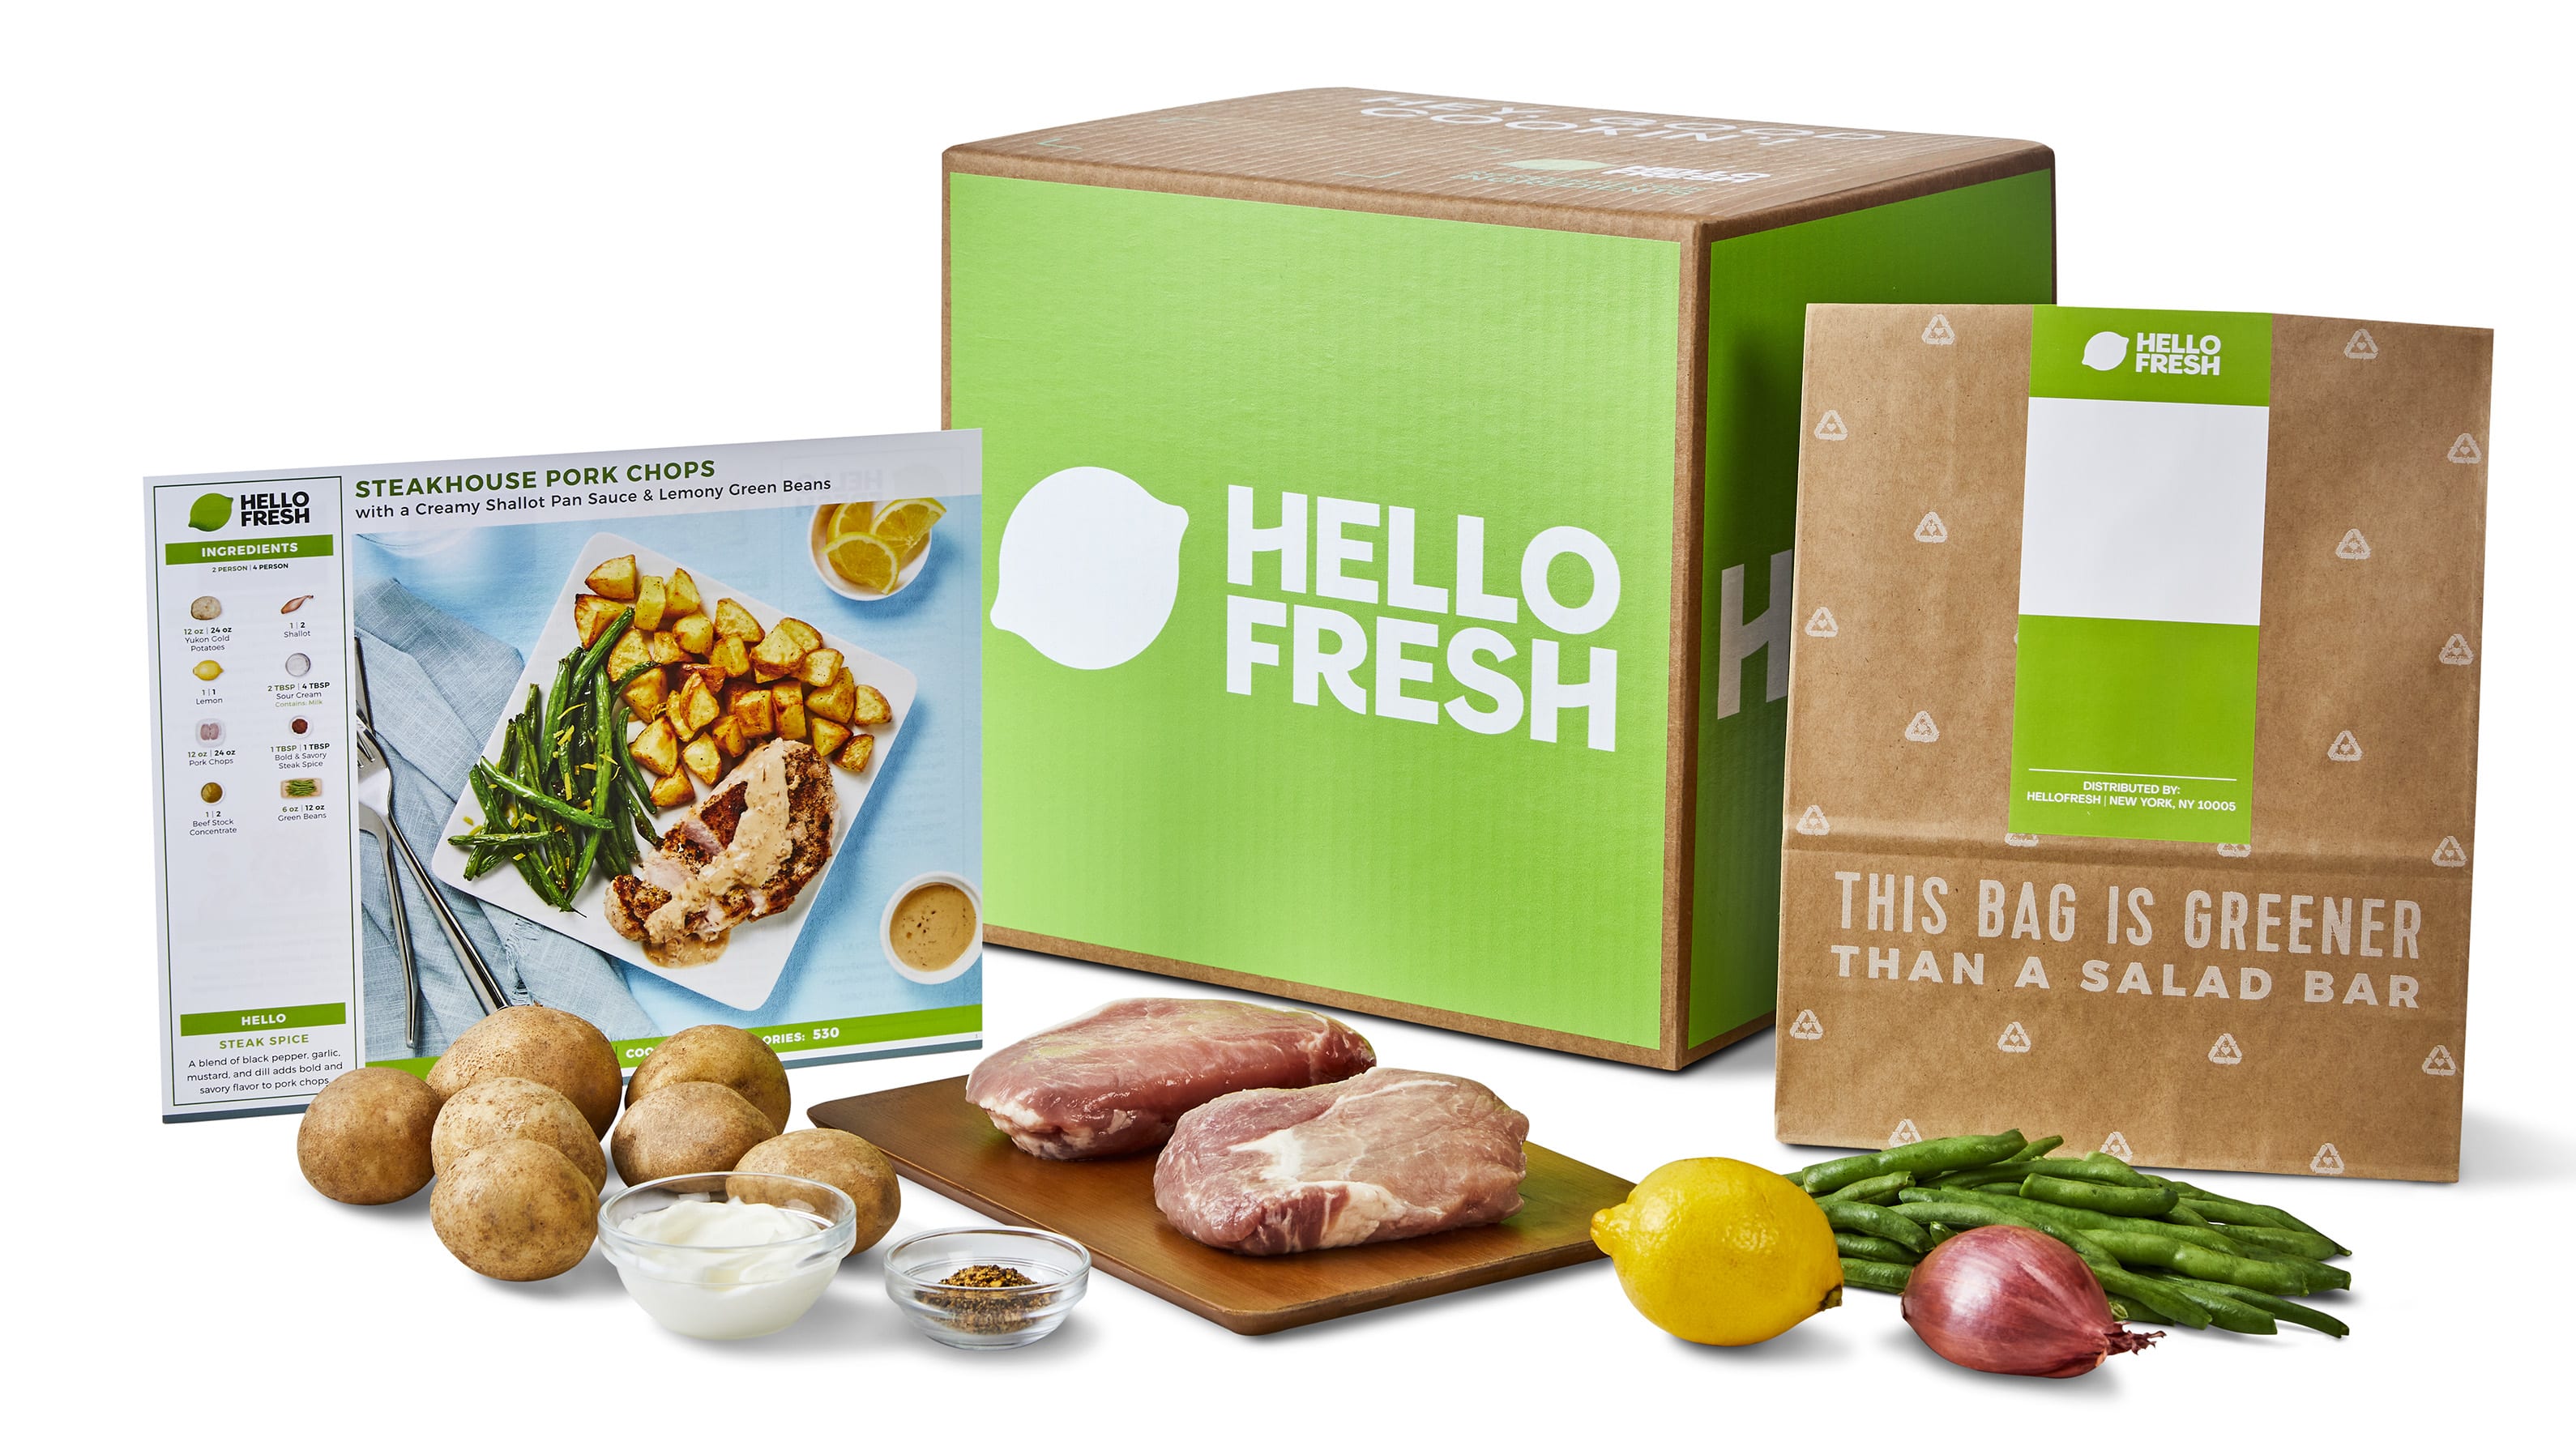 Are you an existing customer wanting to cancel your HelloFresh subscription? Simple.